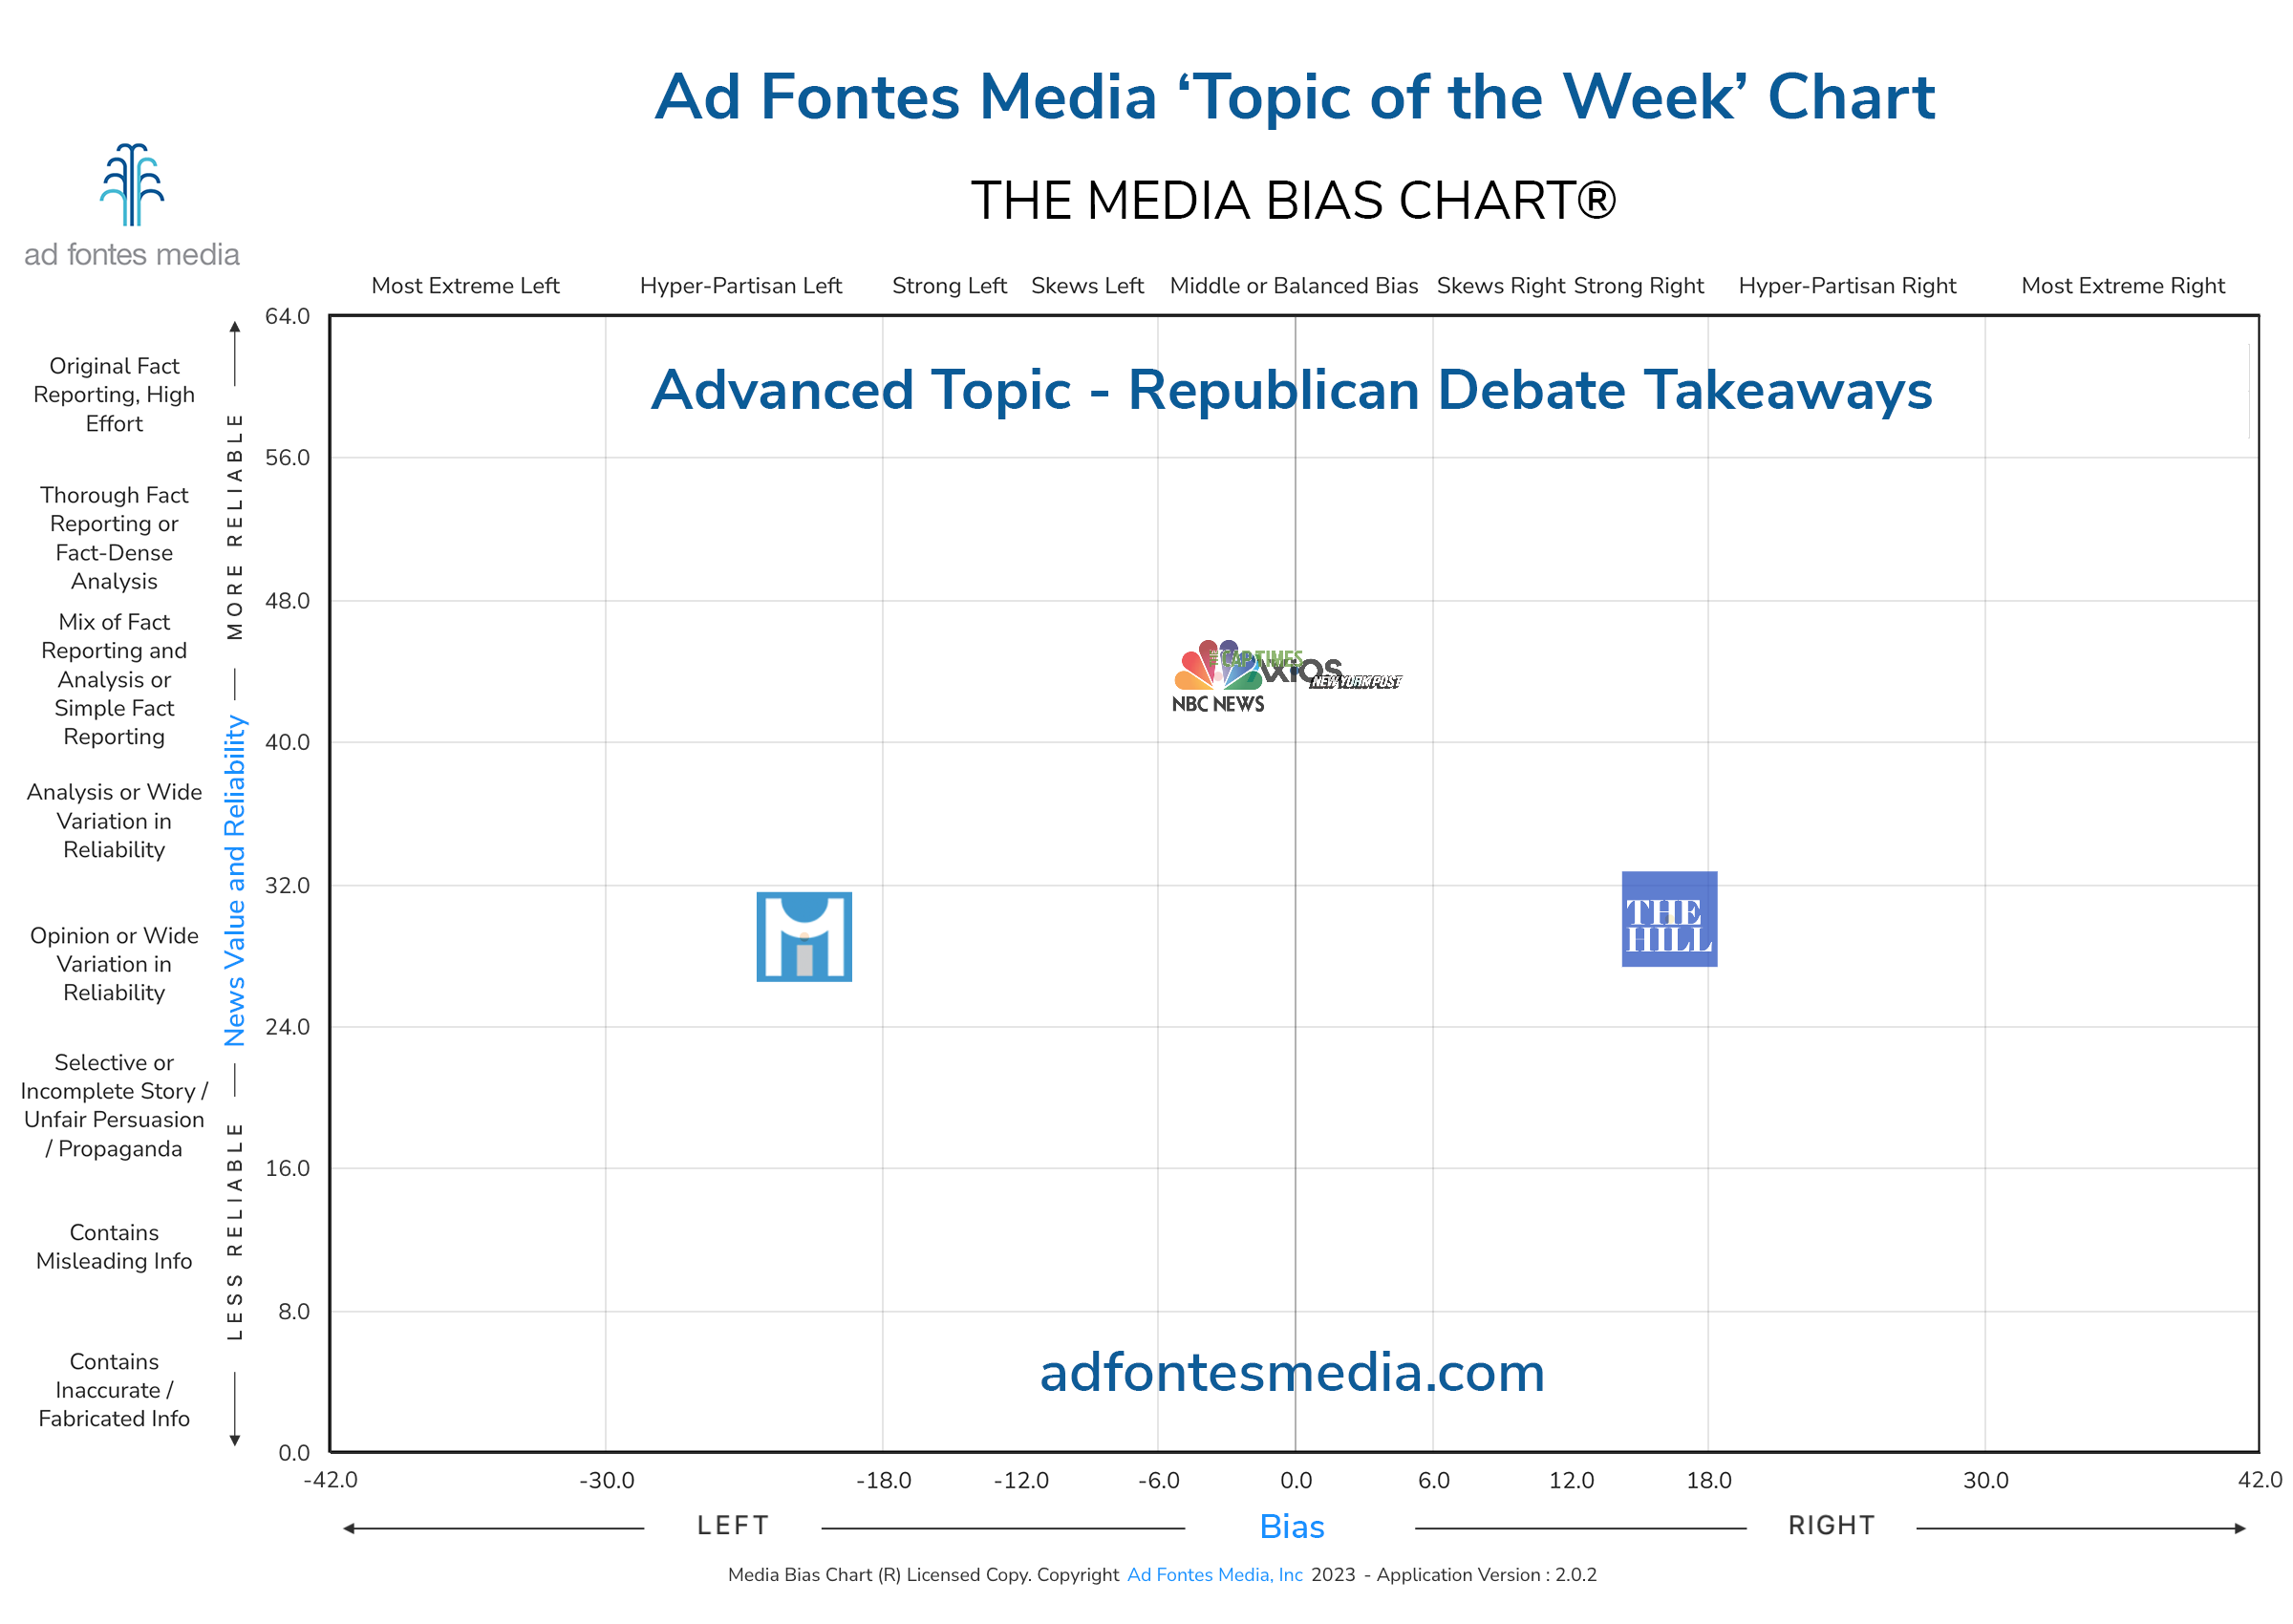 Scores of the Republican Debate Takeaways articles on the chart